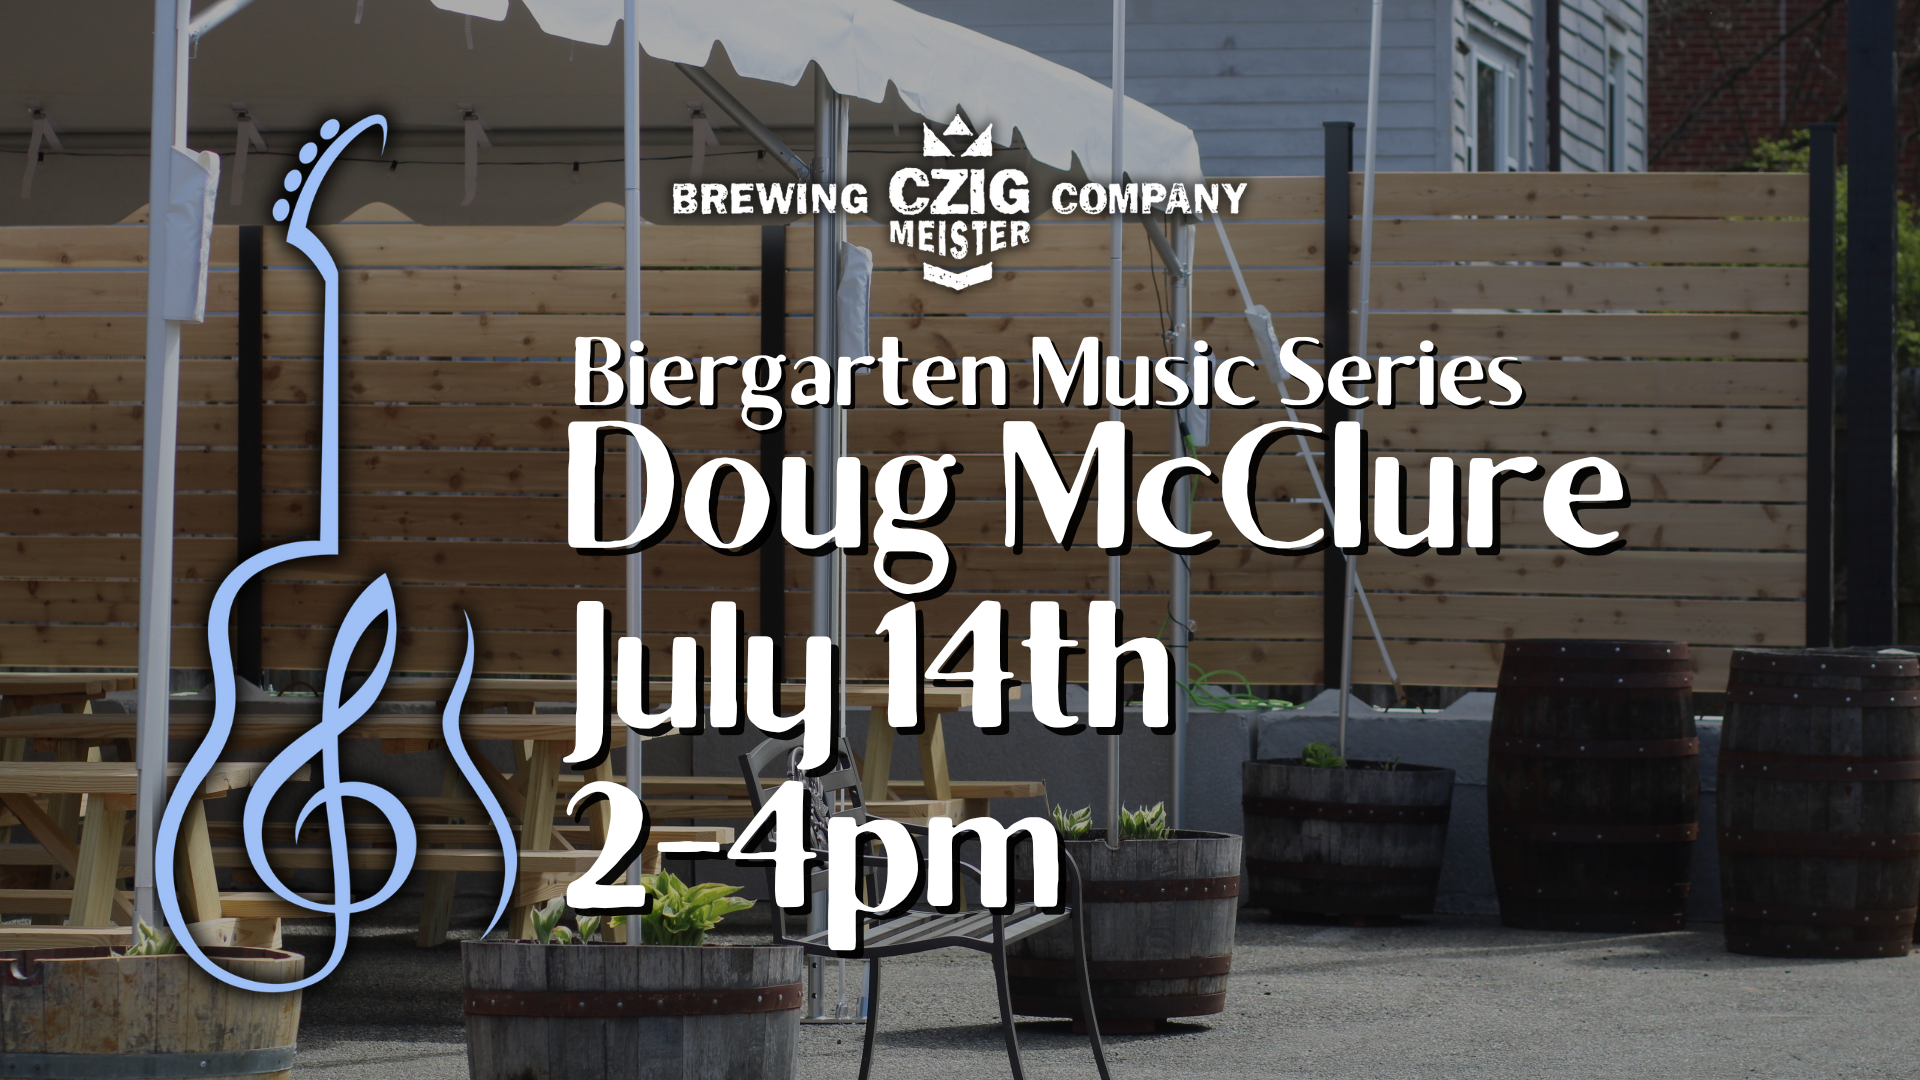 Doug McClure performing at Czig Meister Brewing Company on July 14th